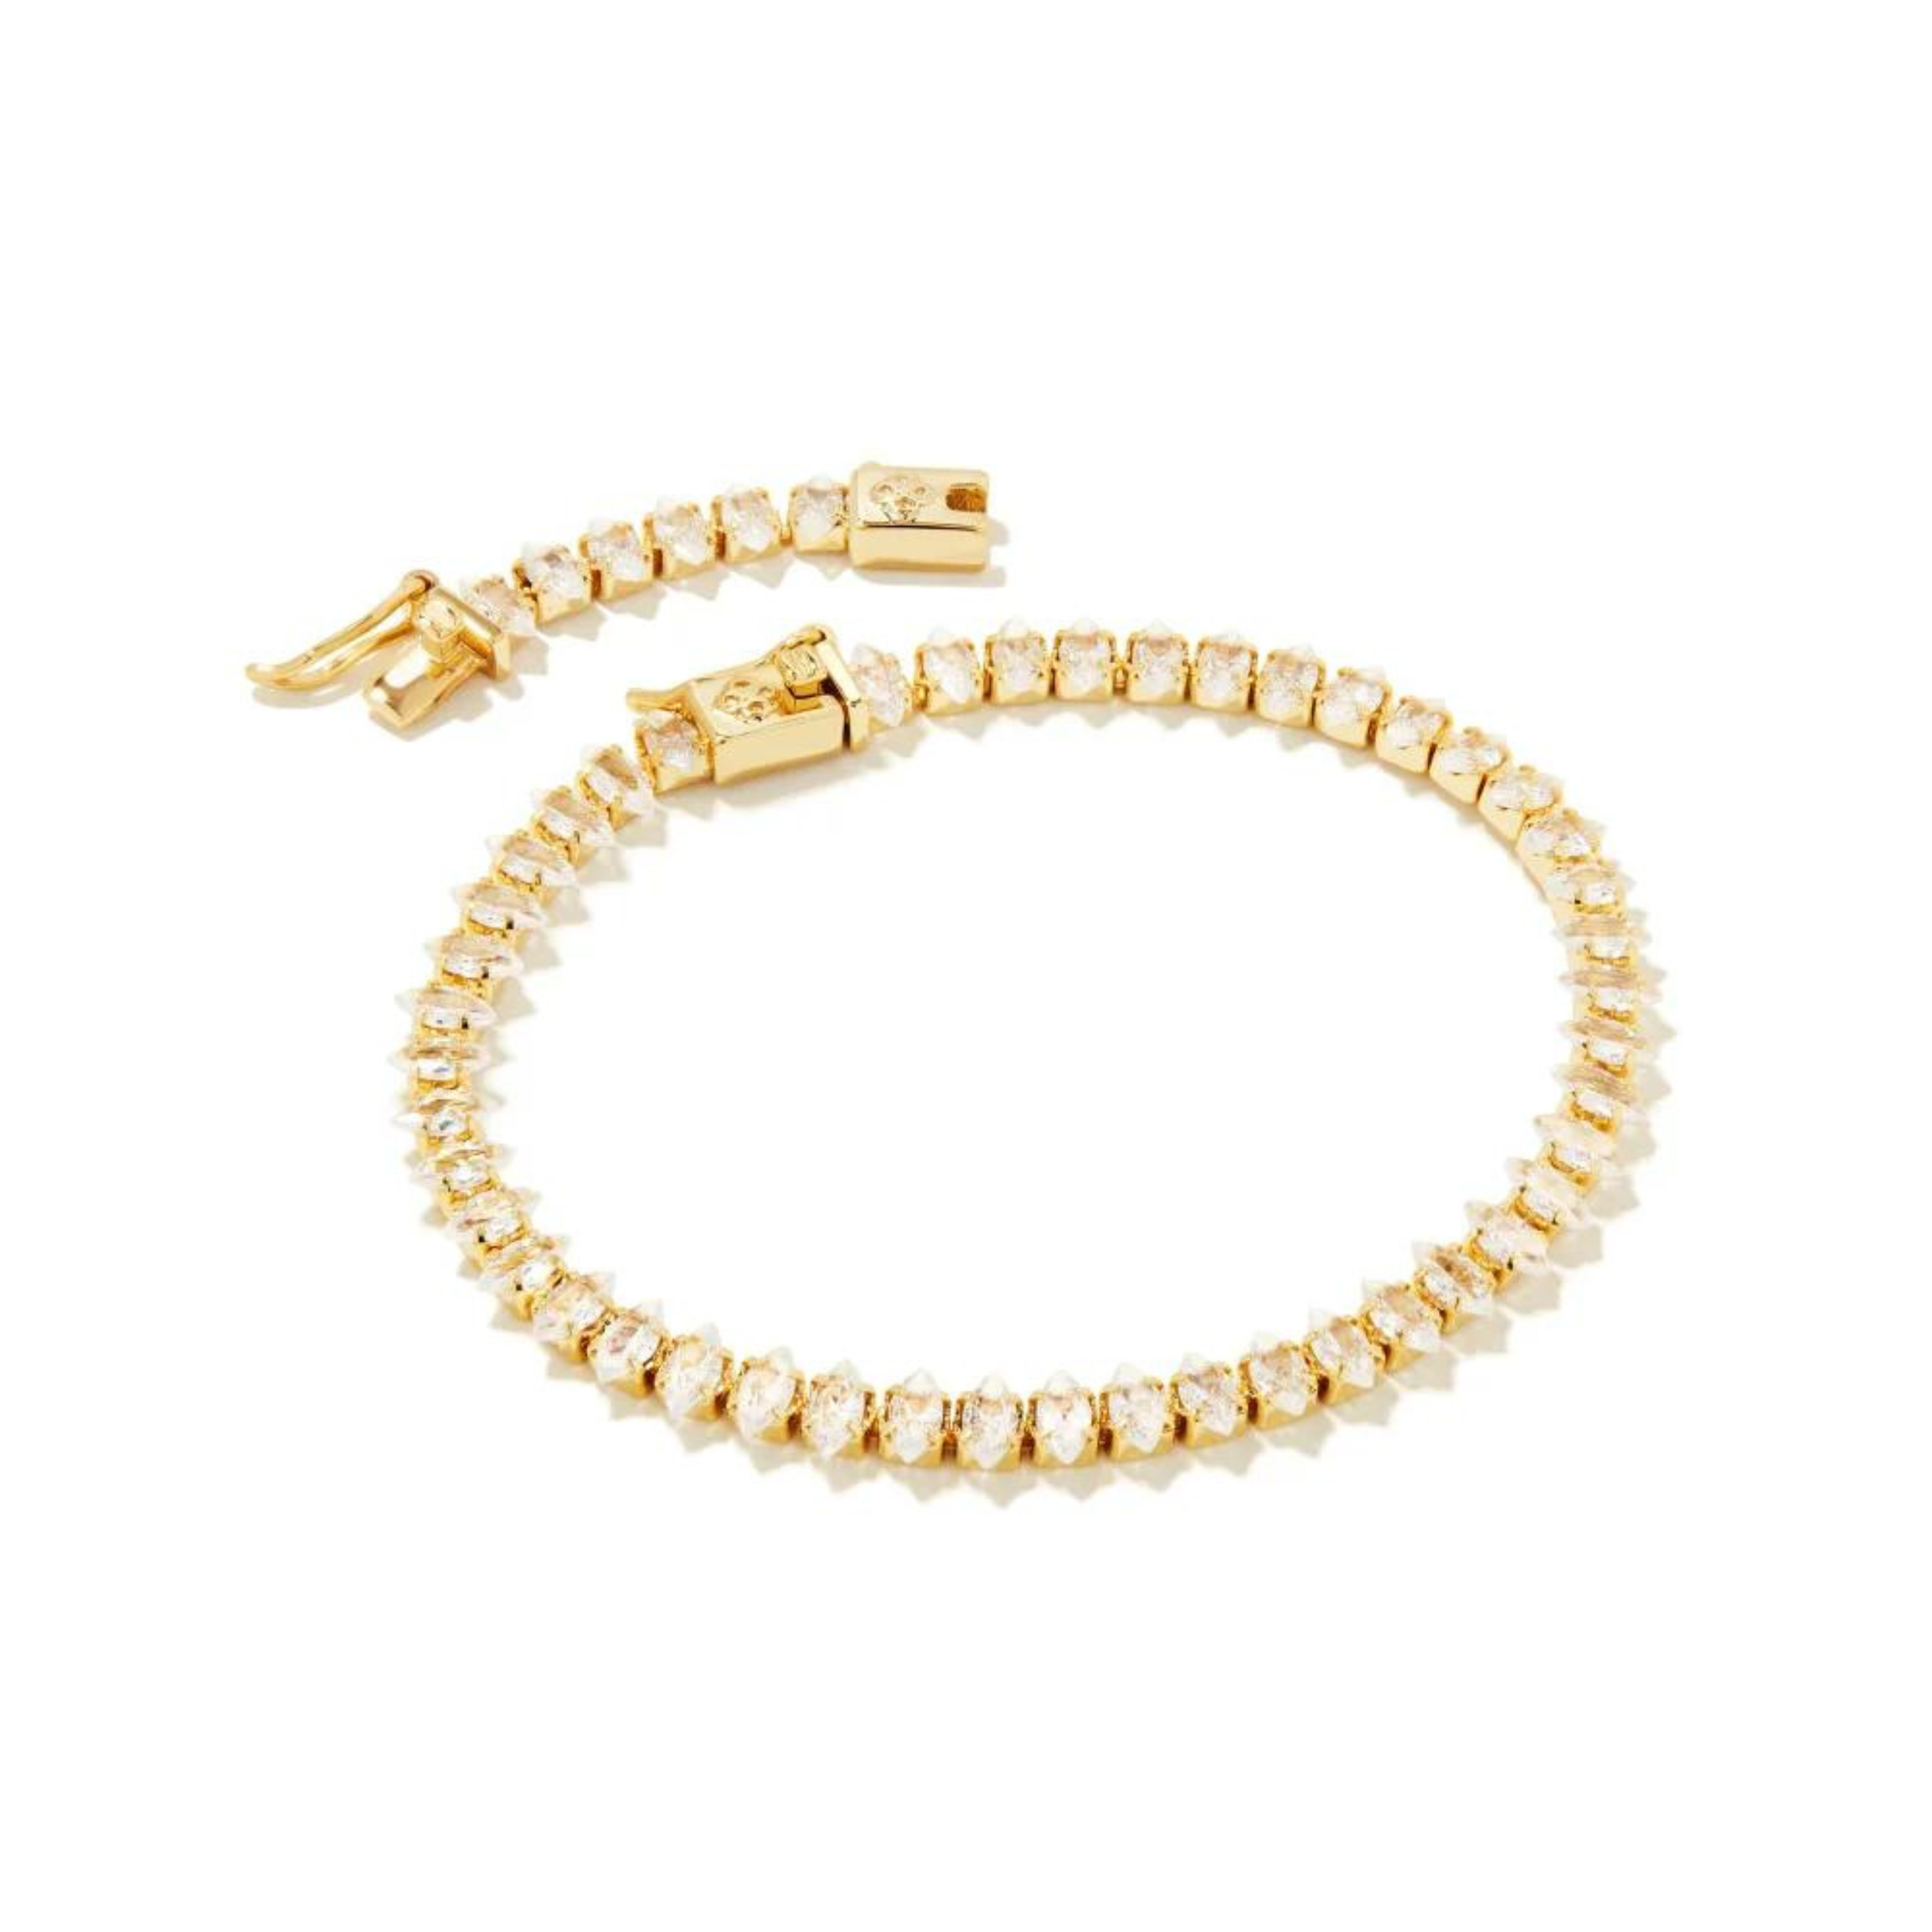 Pictured is a clear crystal tennis bracelet in gold on a white background.